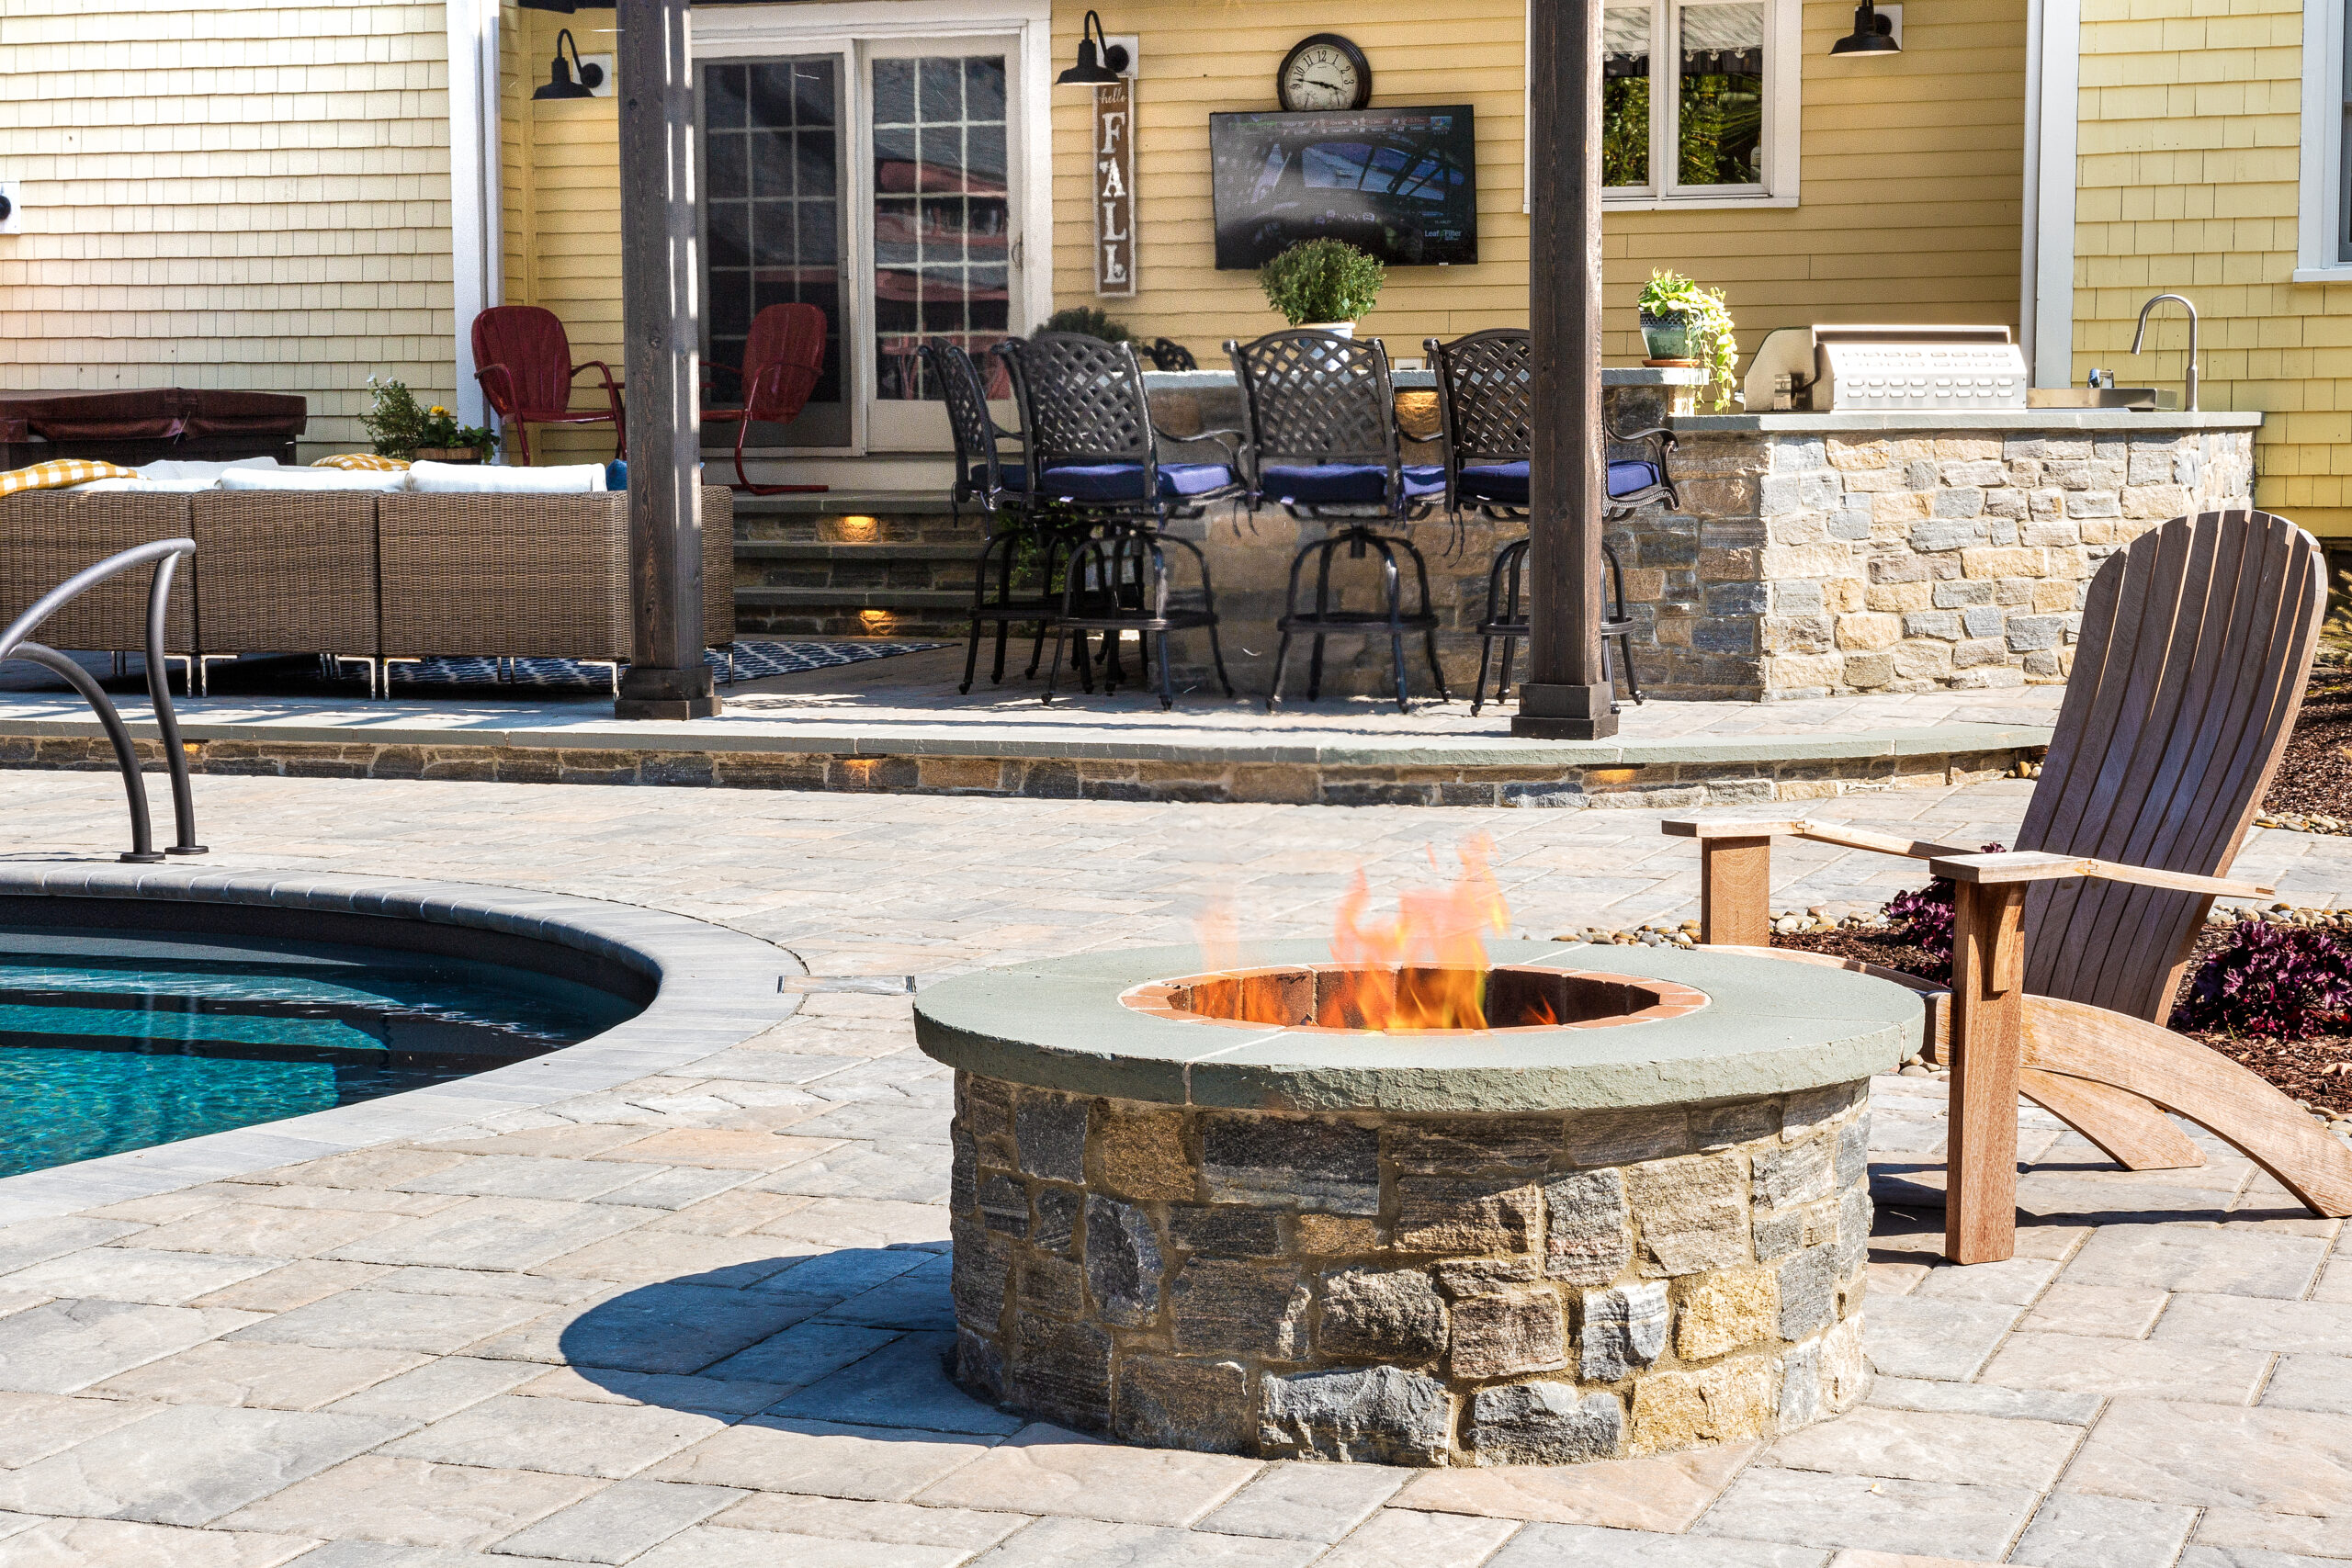 Chair by outdoor fire pit next to pool.